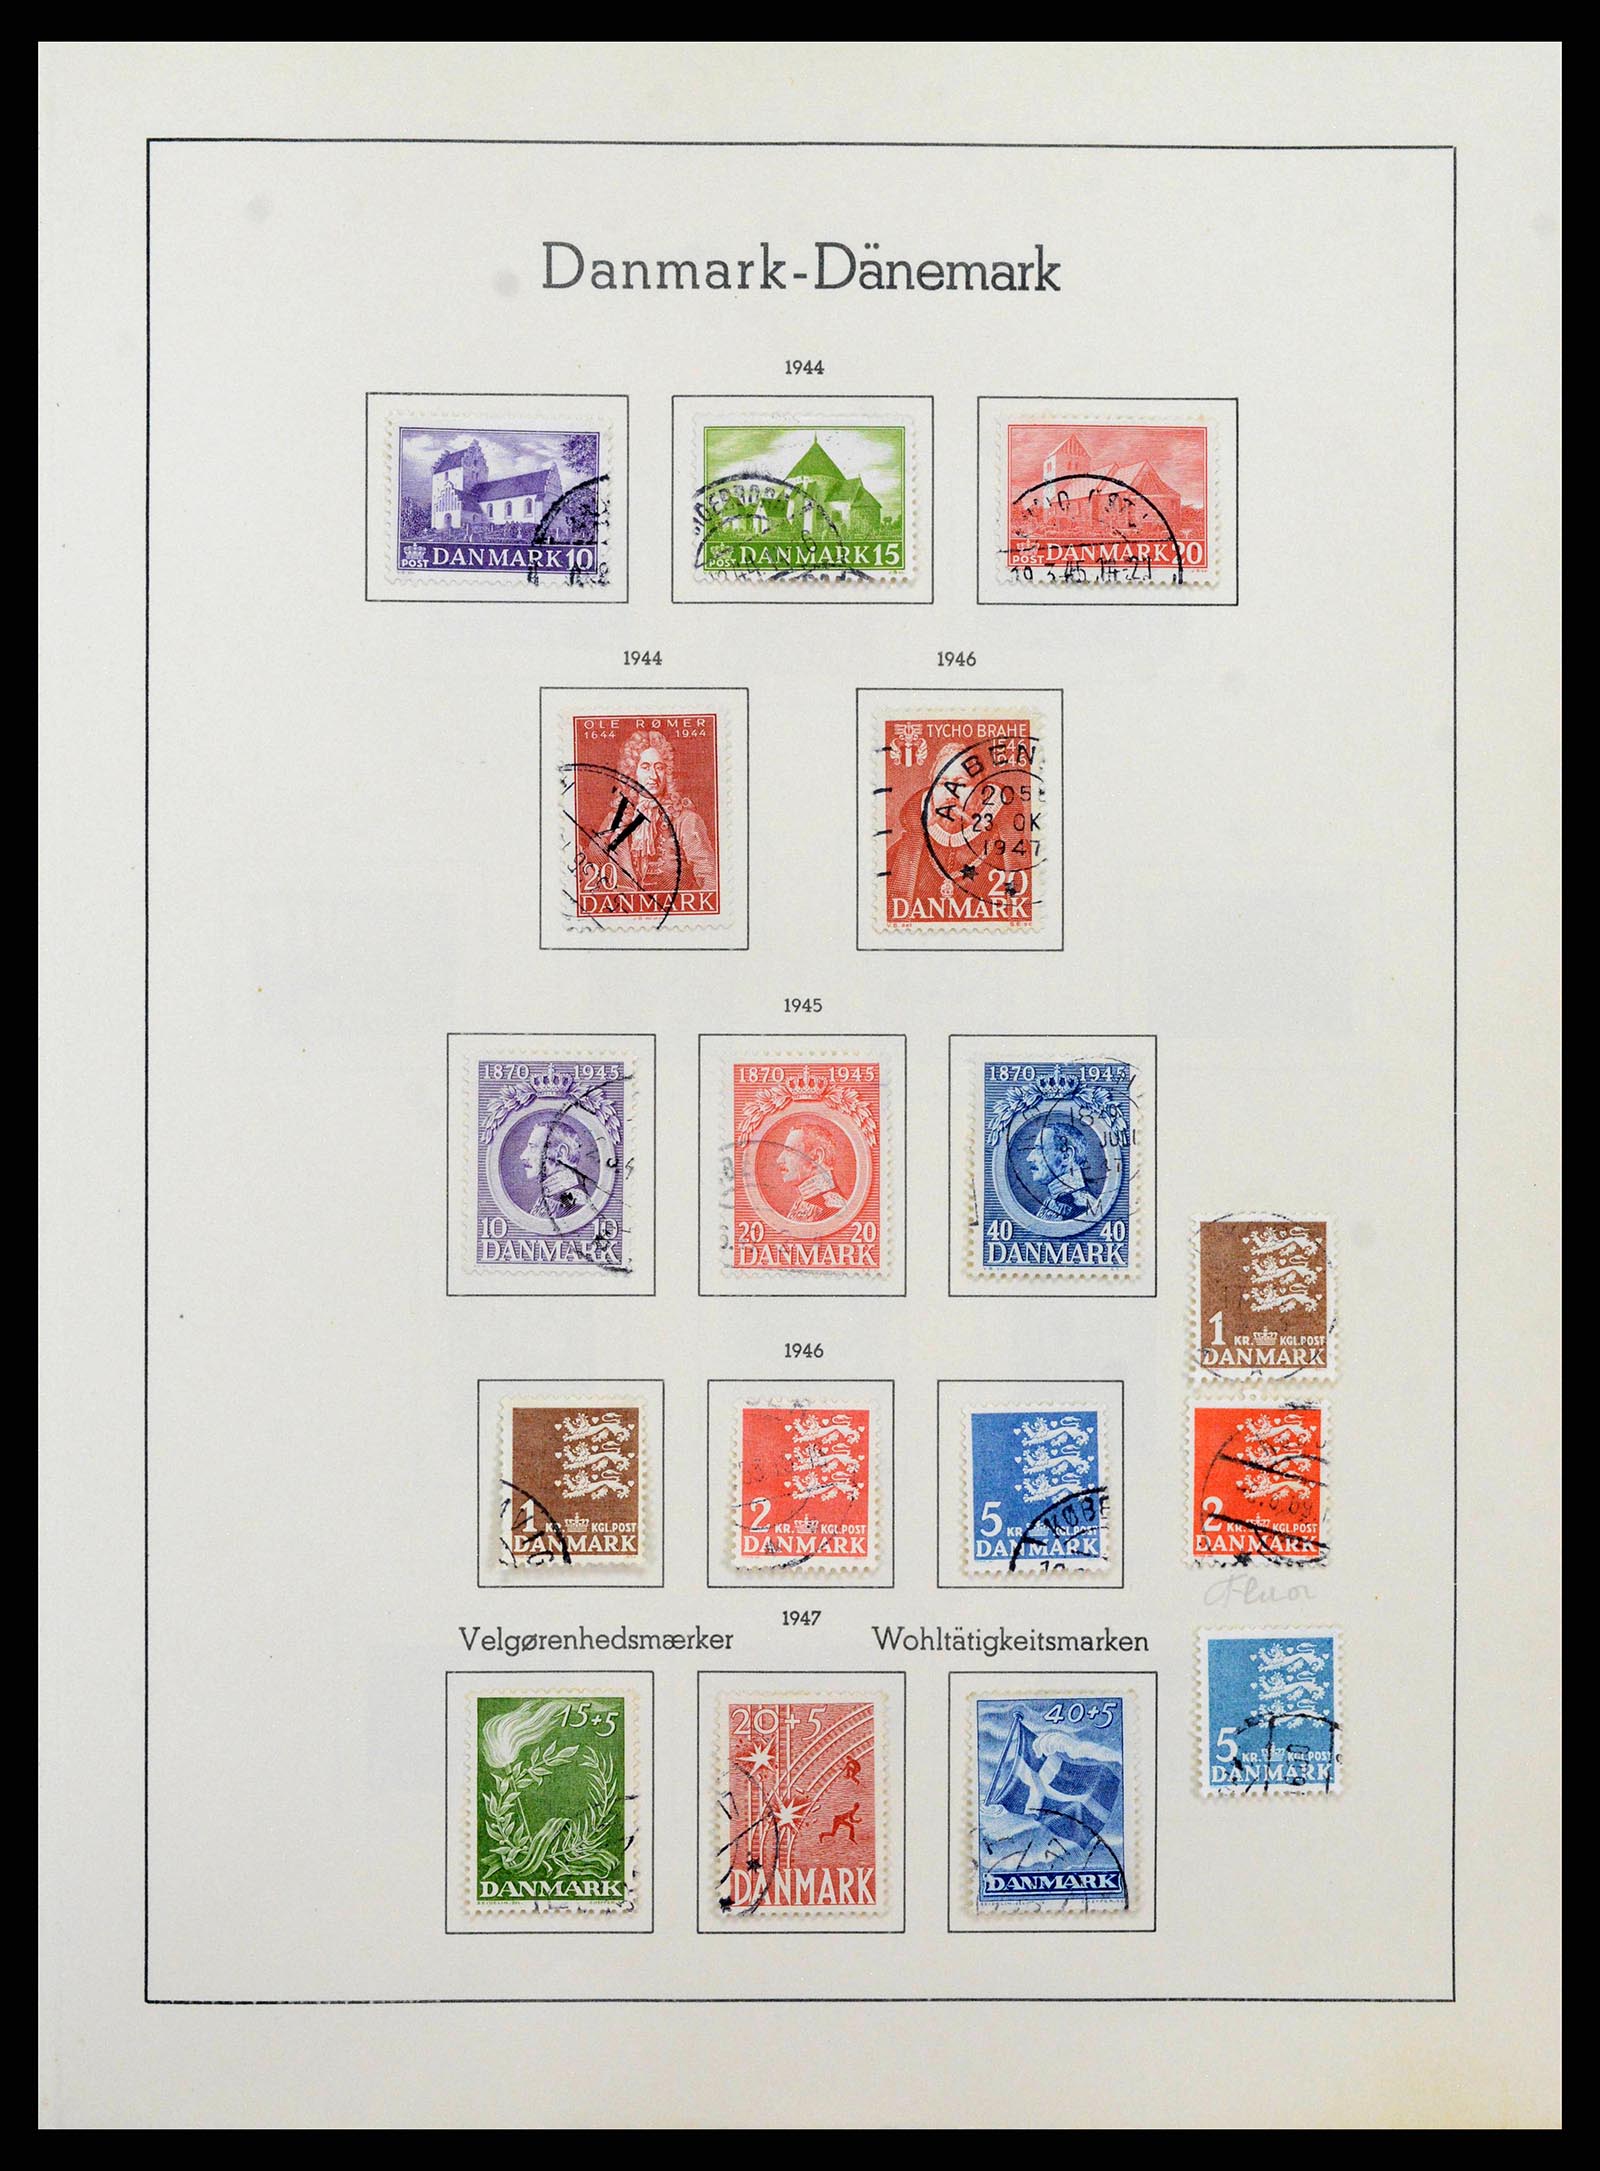 38743 0021 - Stamp collection 38743 Denmark 1851-1989.